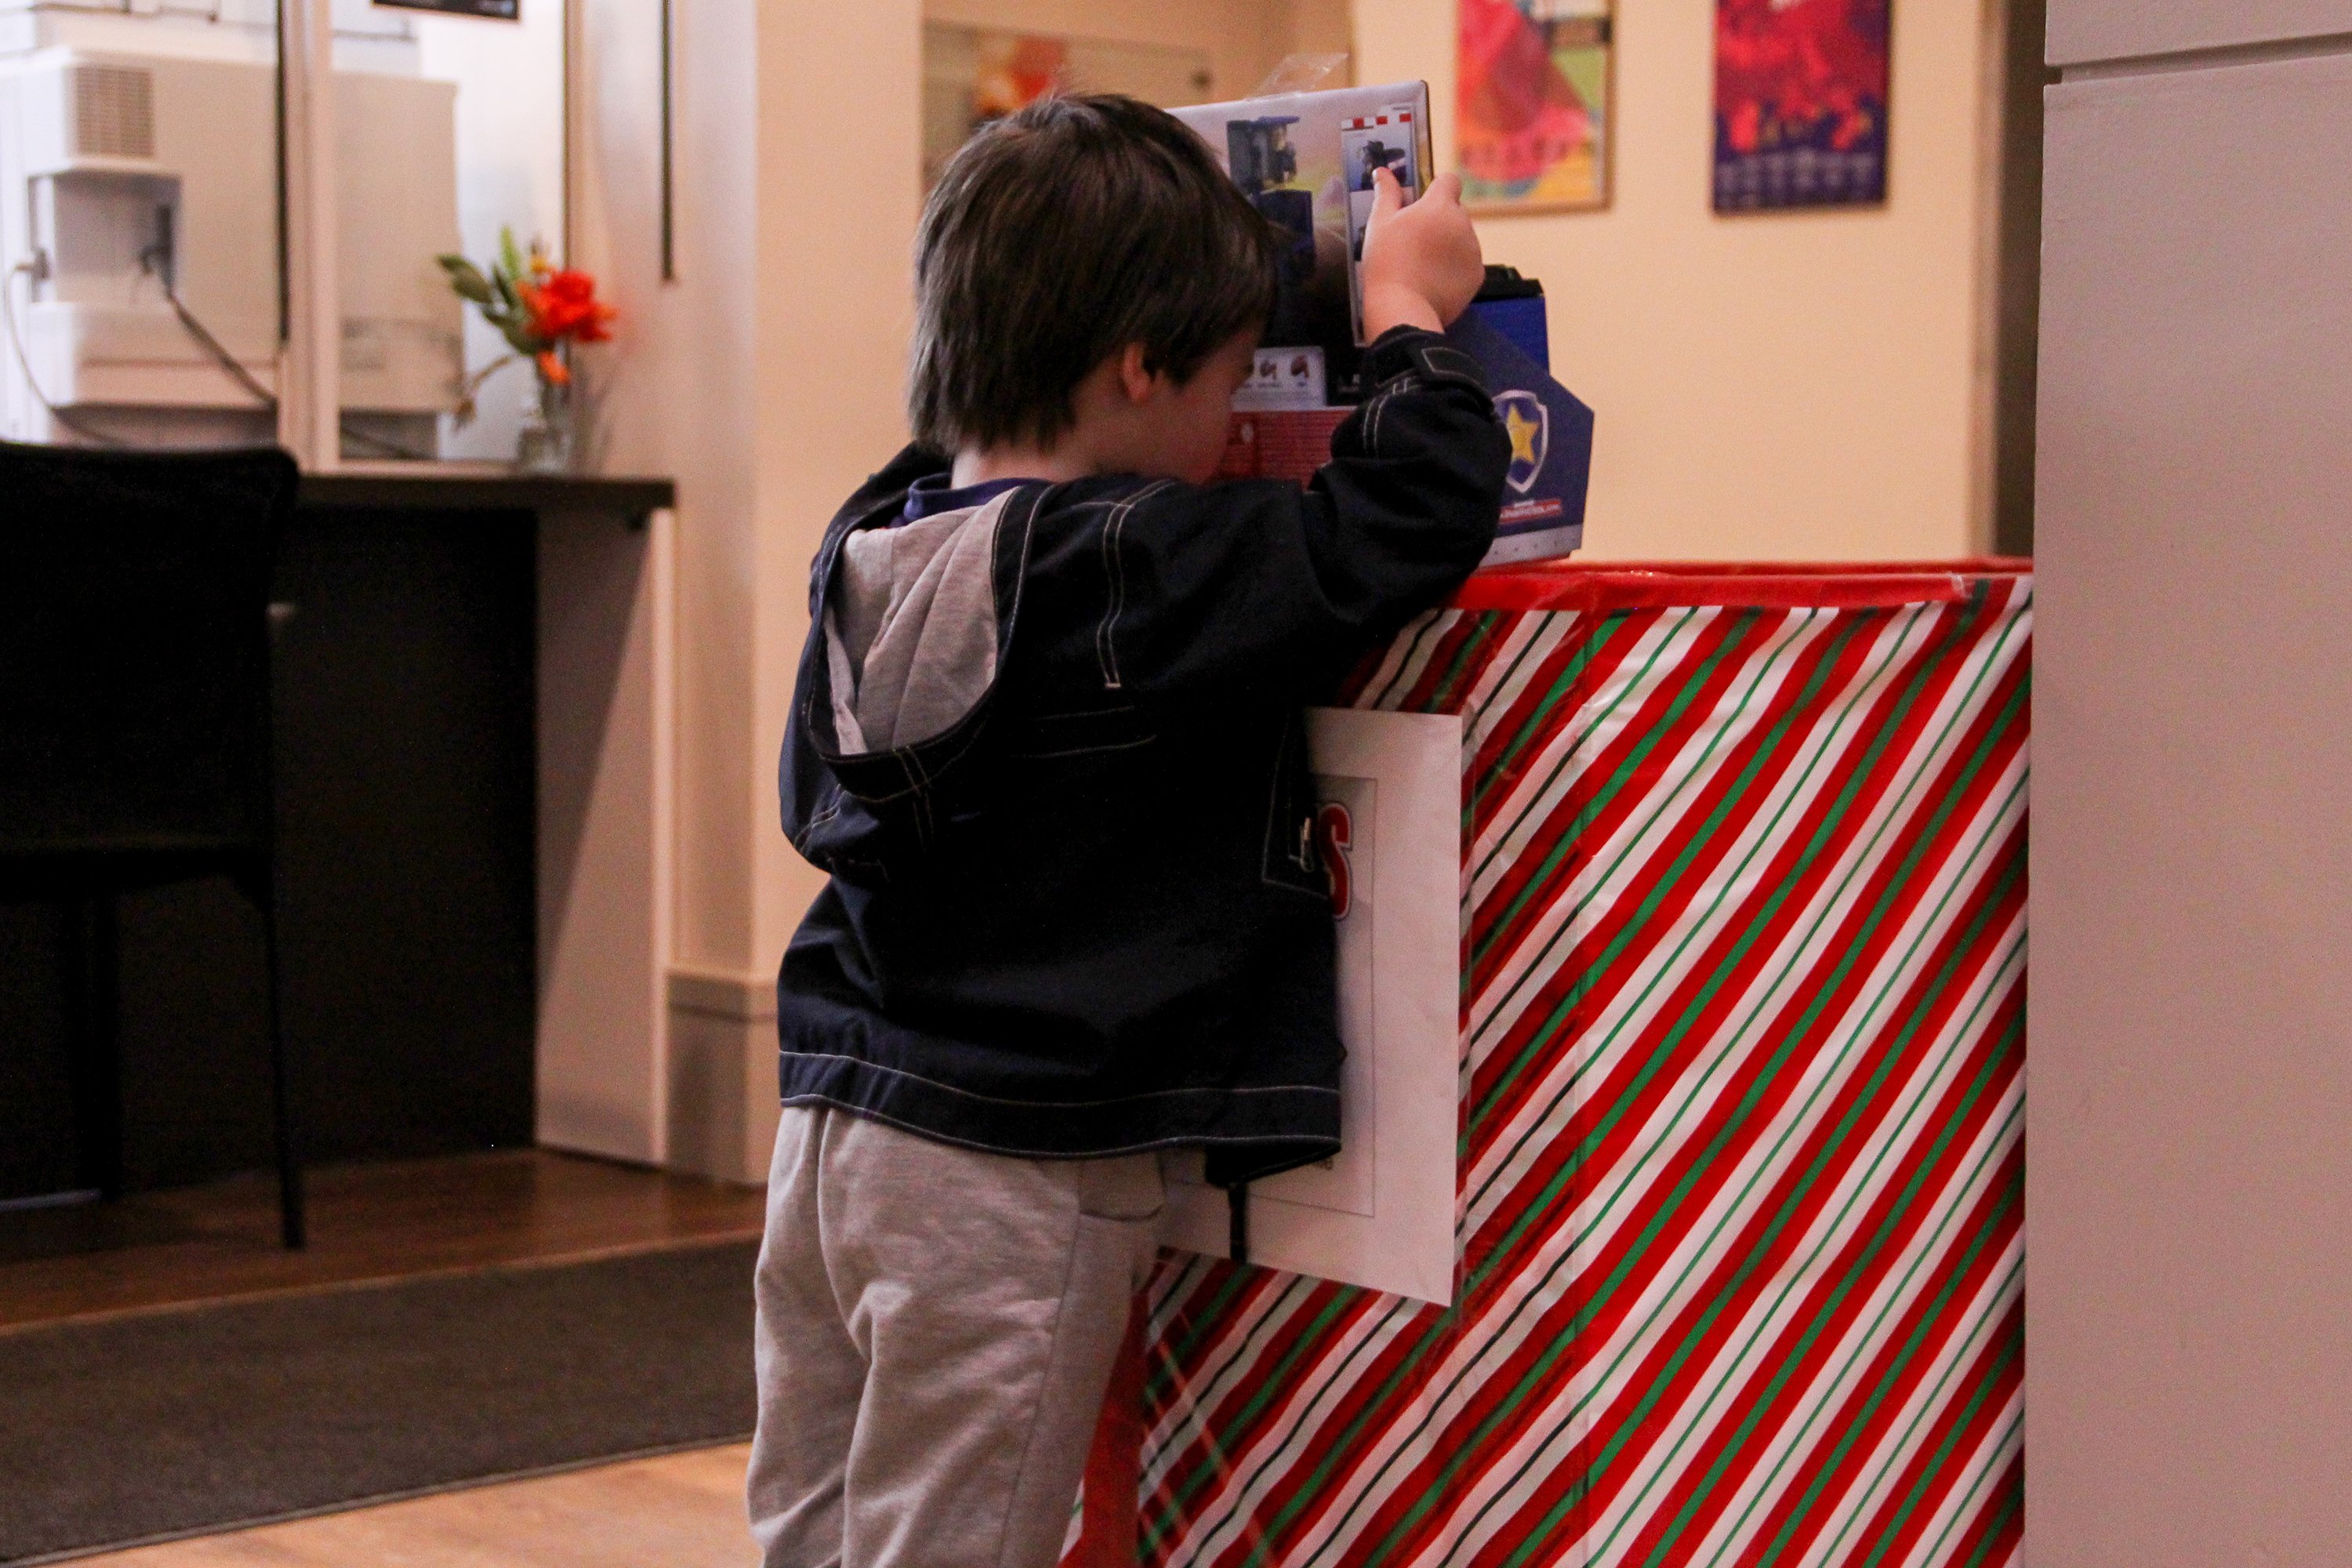 A child drops a toy donation in a Toys for Tots collection box